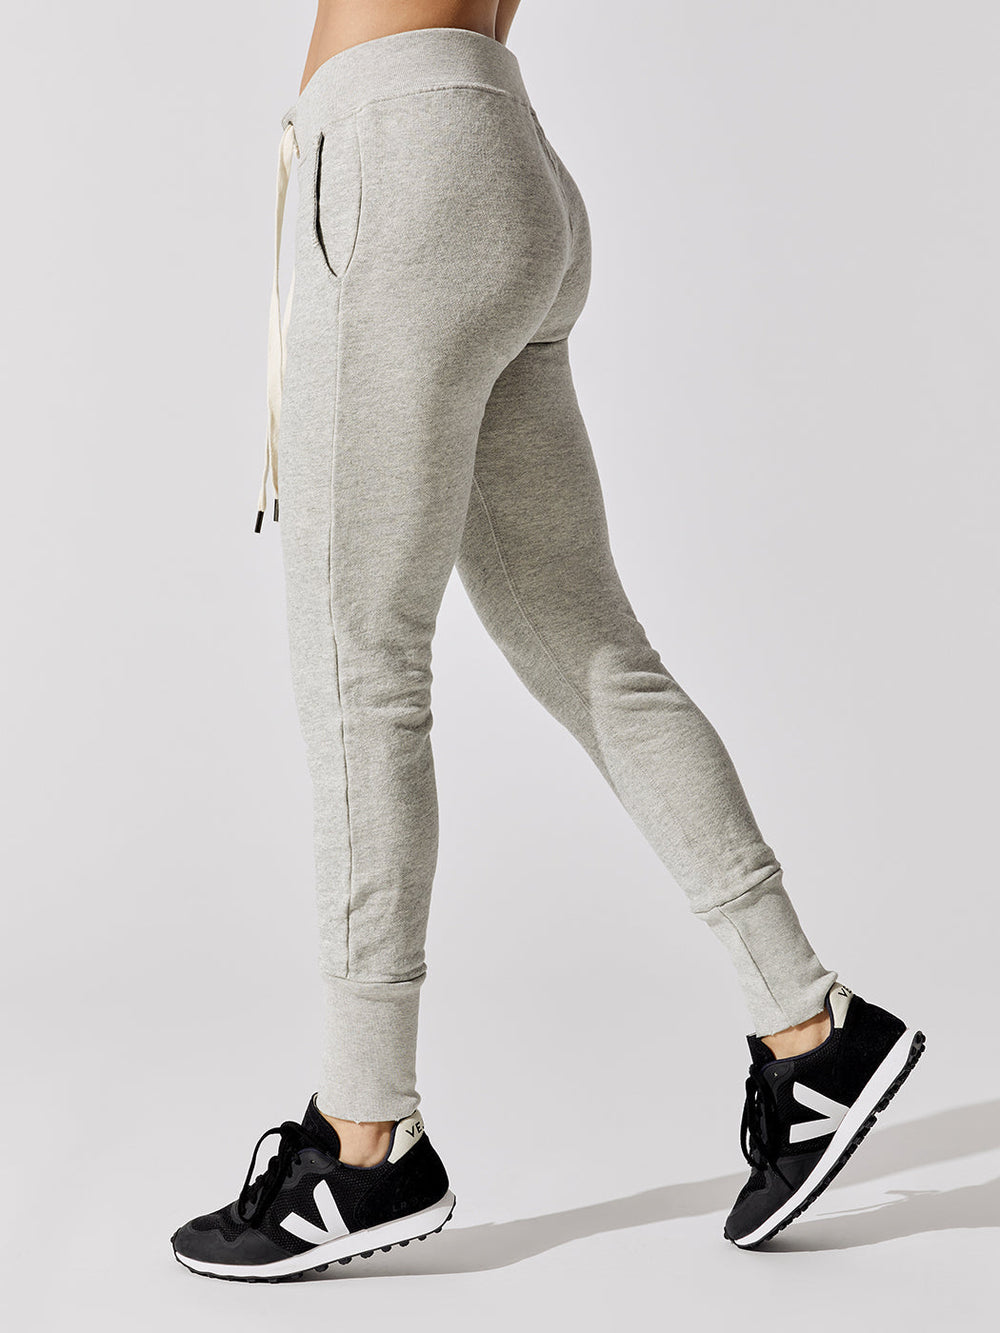 90 Degree By Reflex - Women's Slim Fit Side Pocket Ankle Jogger - Heather  Grey - Small